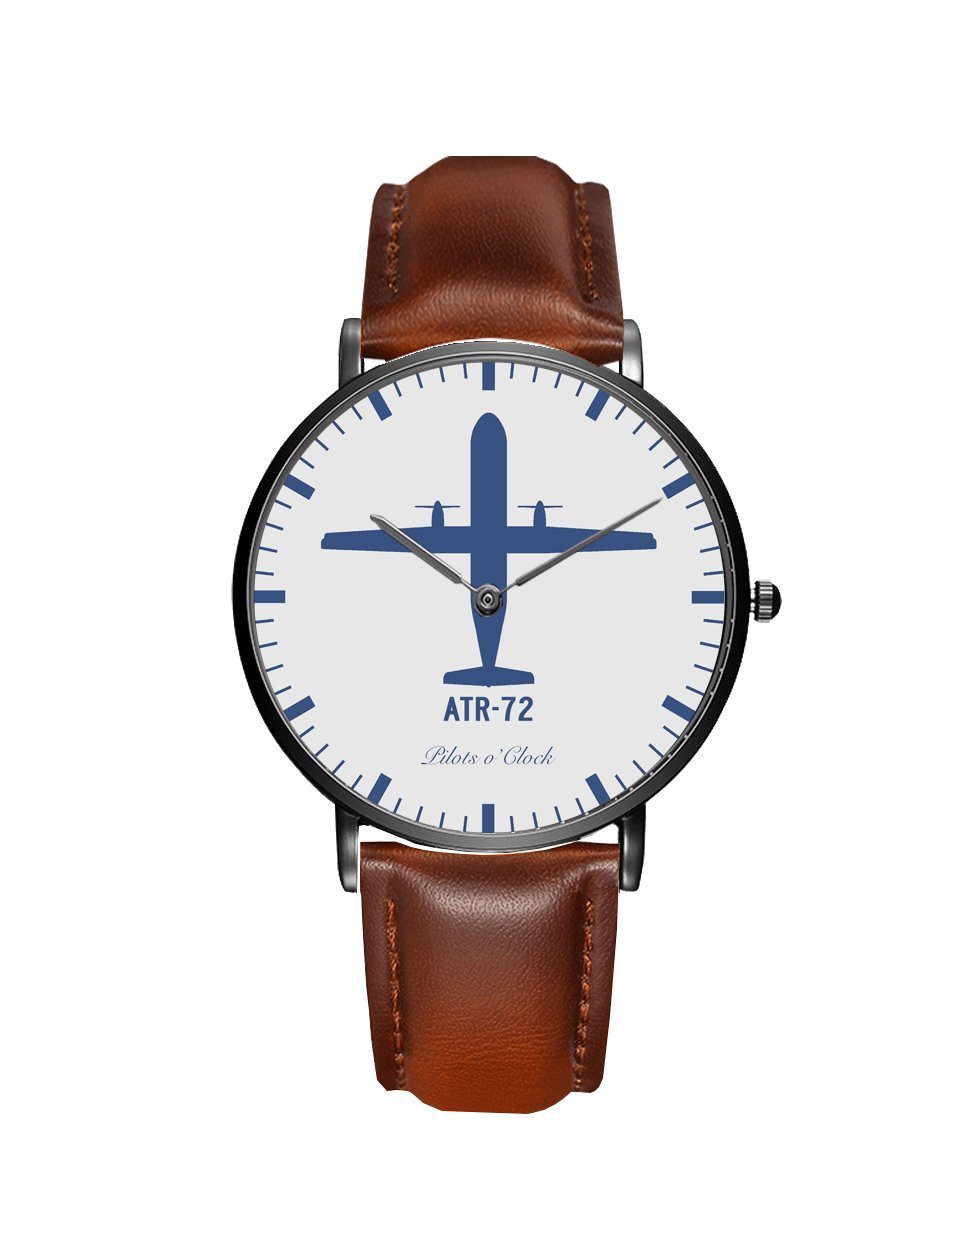 ATR-72 Leather Strap Watches Pilot Eyes Store Black & Brown Leather Strap 